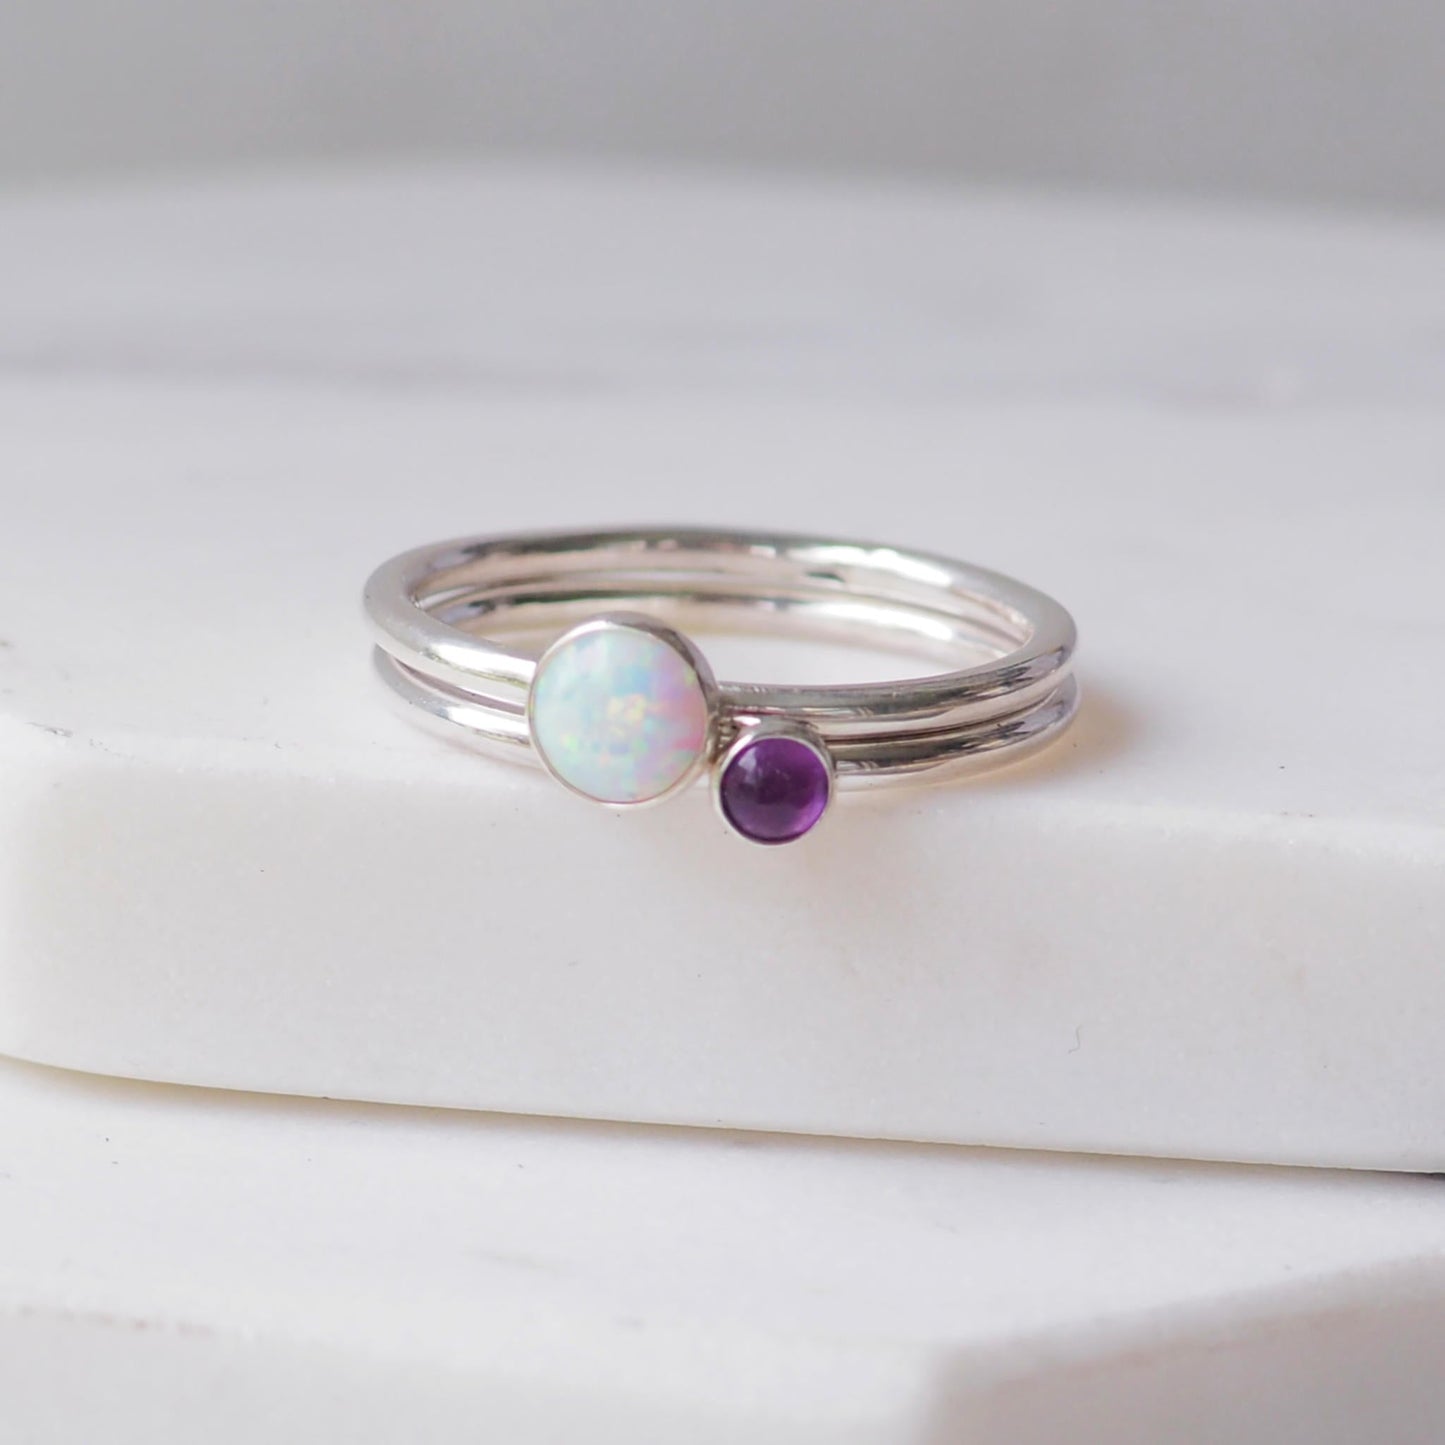 Two silver rings with lal Opal and Amethyst gemstones. Birthstones for February and October. Handmade to your ring size by maram jewellery in Scotland , UK